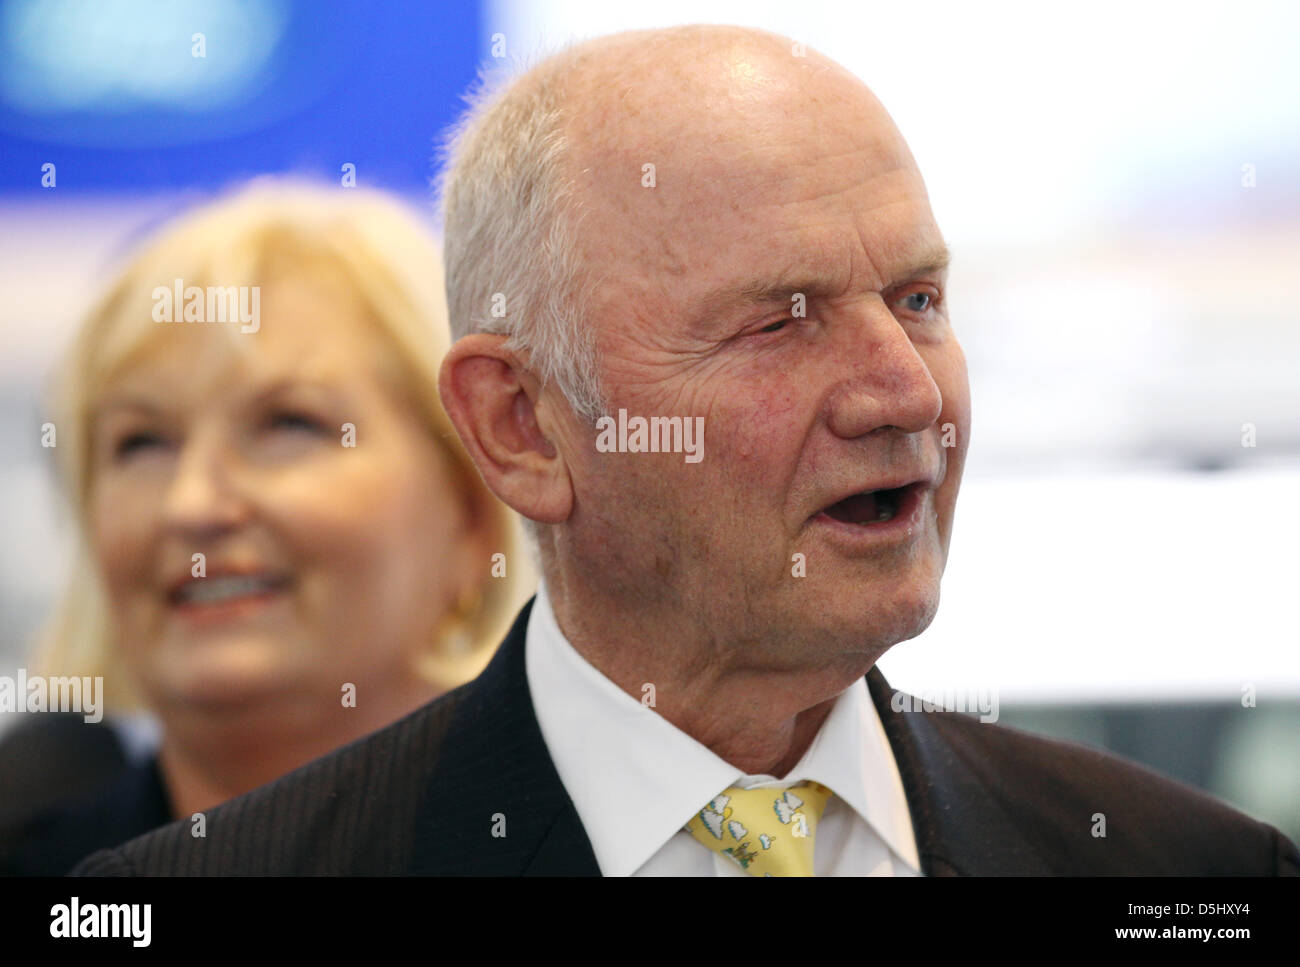 Ferdinand Piech (R), chairman of the supervisory board at Volkswagen, and wife Ursula Piech, member of the supervisory board at Volkswagen, stand at the Ford stand at the IAA Frankfurt Motor Show for commercial vehichles in Hanover, Germany, 18 September 2012. The 64th IAA commercial vehichles fair runs from 20 until 27 September 2012. Photo: FRISO GENTSCH Stock Photo